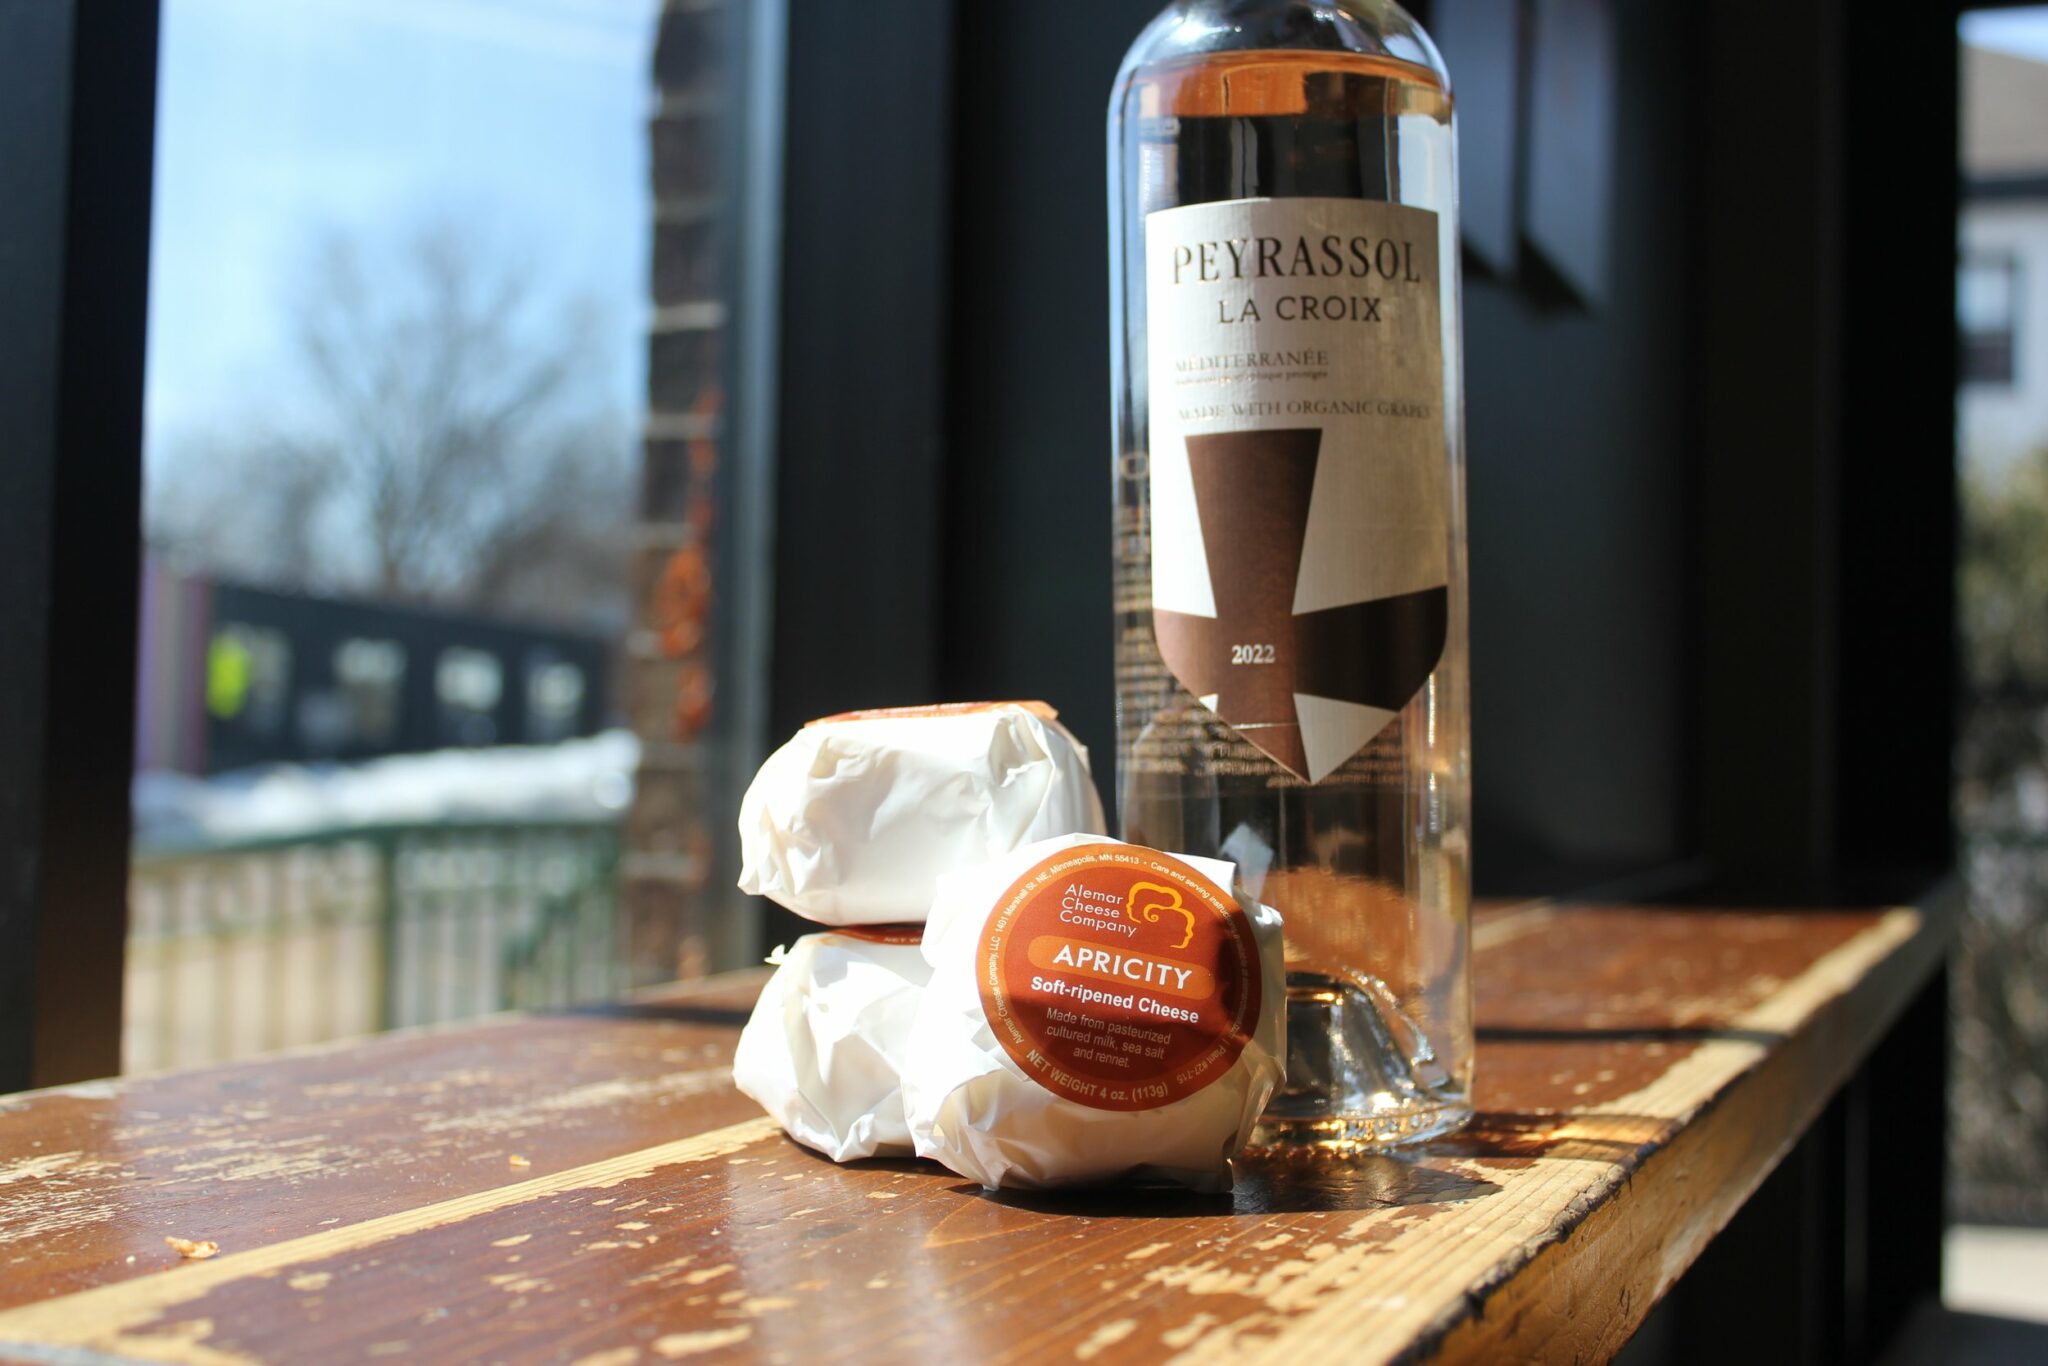 three pieces of cheese stacked next to a bottle of rose on a wooden table near a window